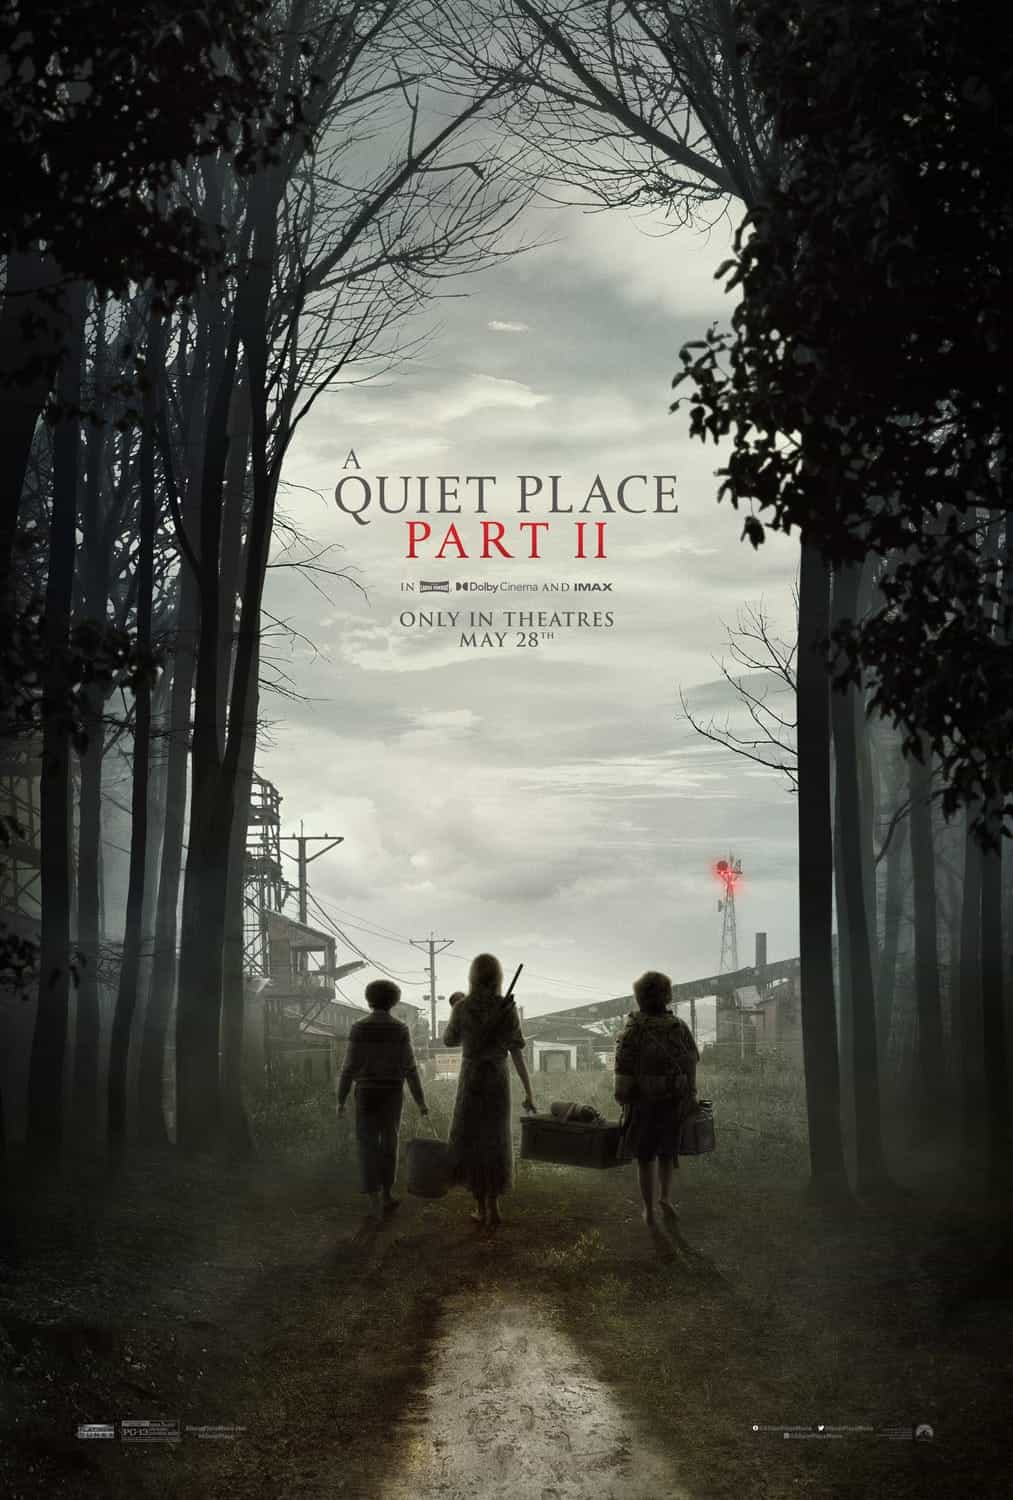 Final trailer for A Quiet Place Part II ahead of the movies UK June 4th release